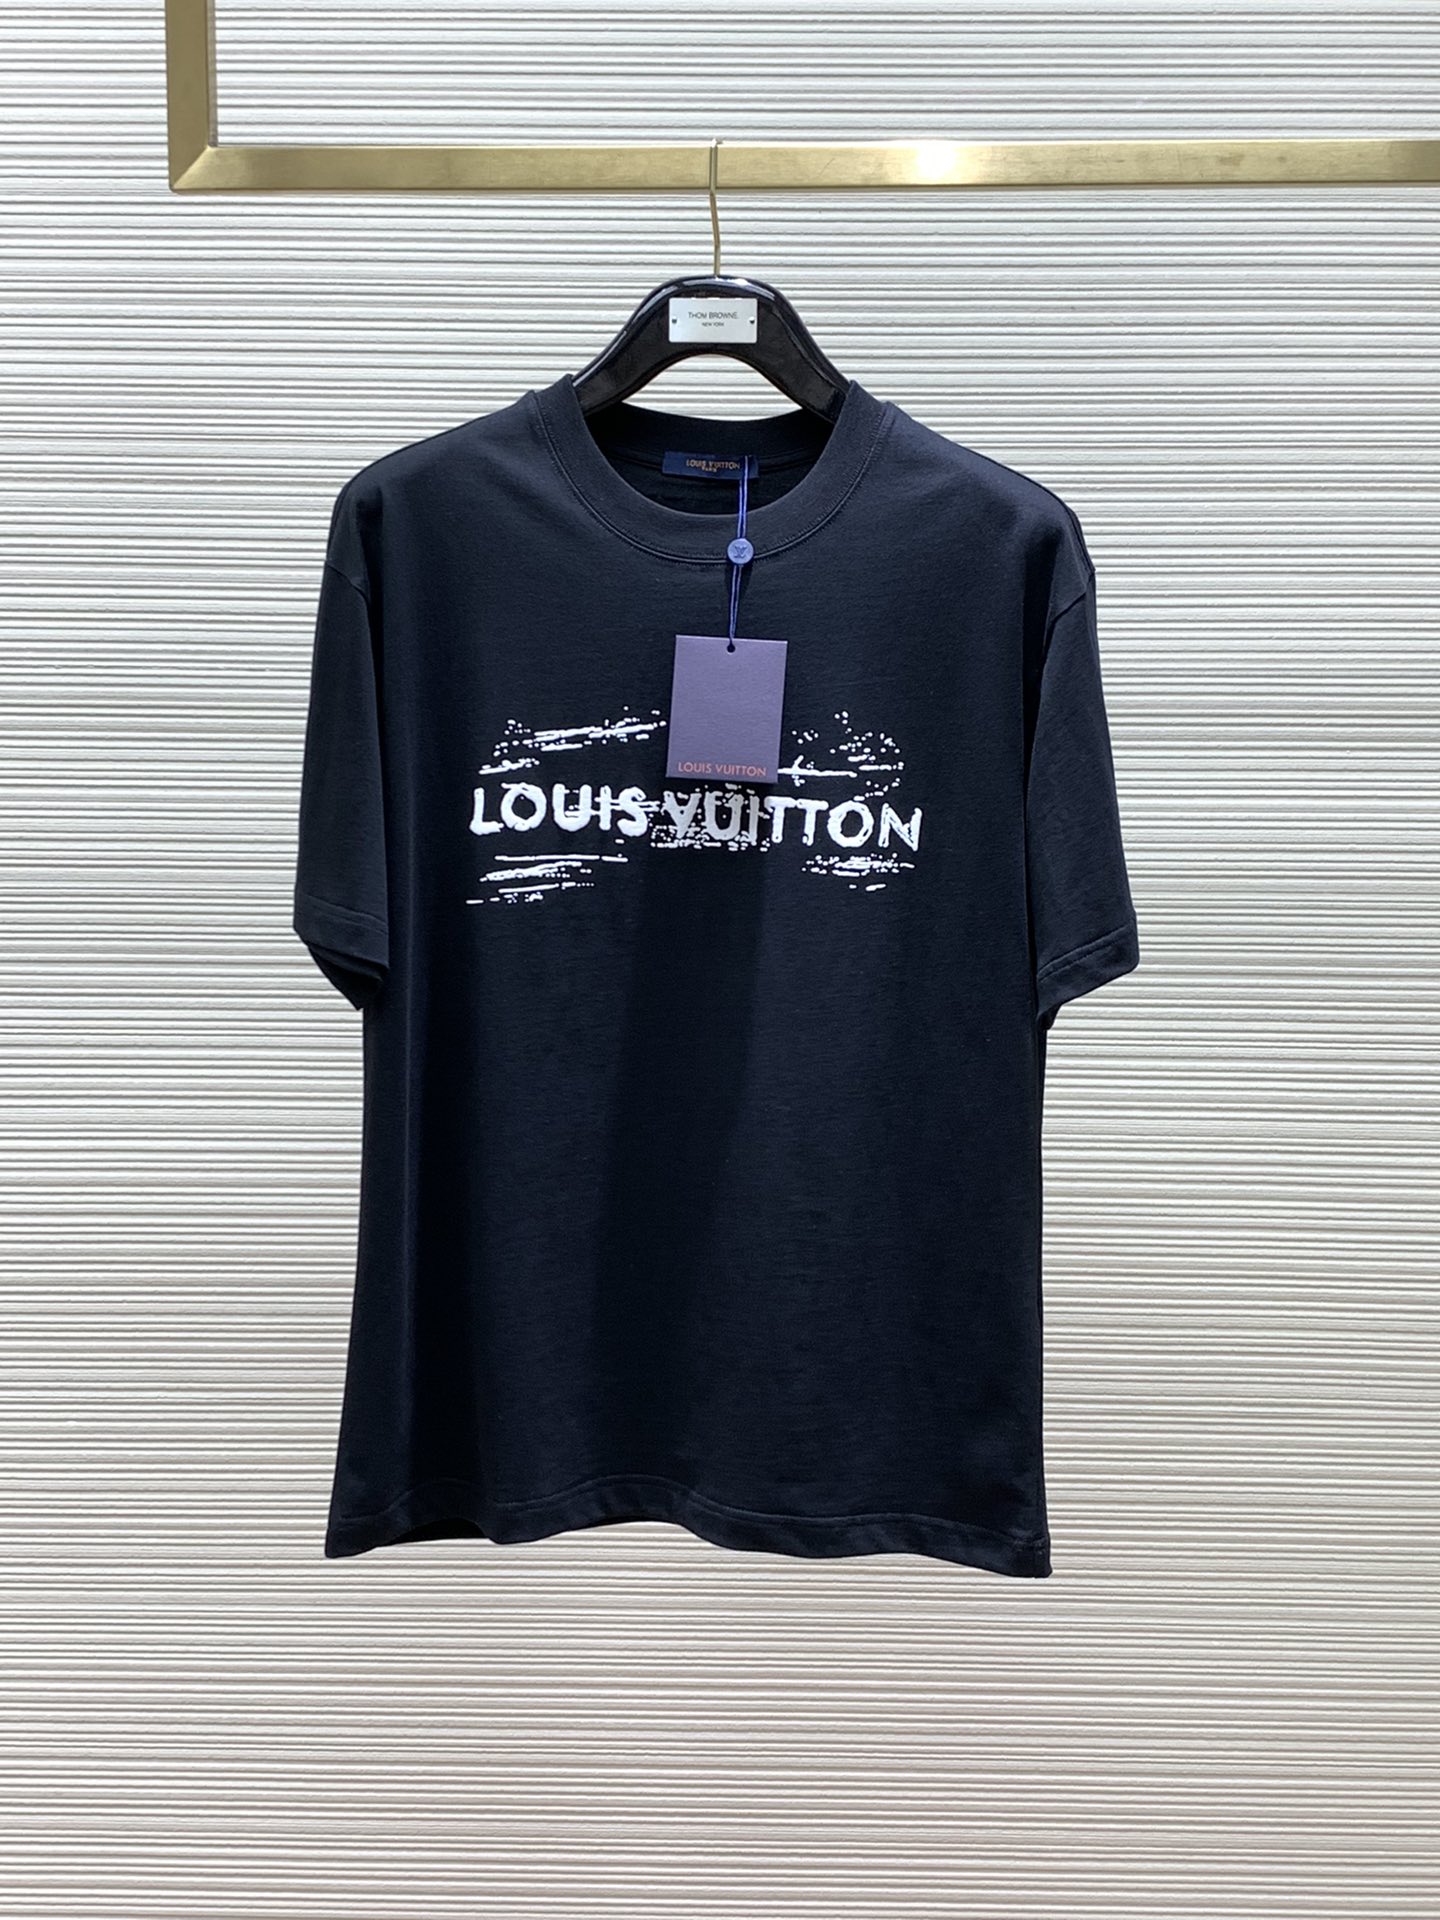 Is it OK to buy replica
 Louis Vuitton Clothing T-Shirt Printing Spring/Summer Collection Fashion Short Sleeve